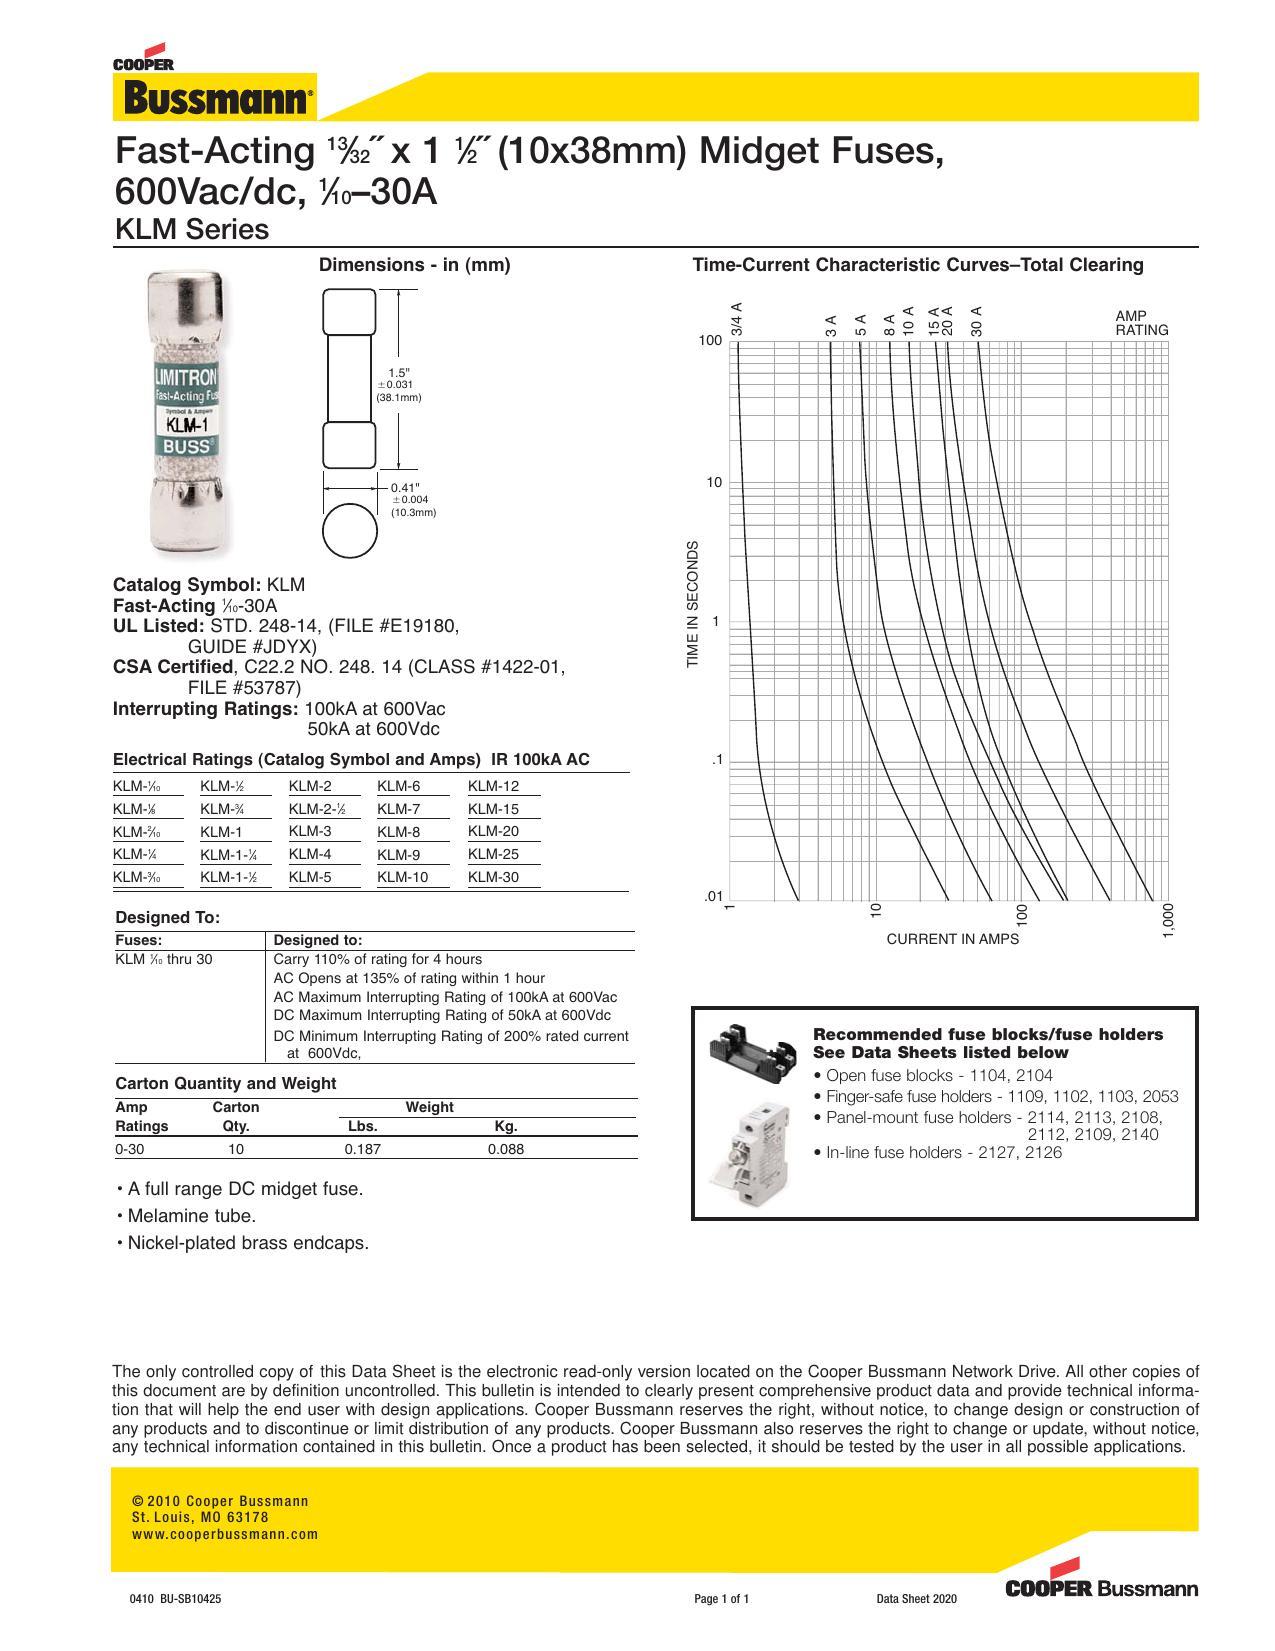 military-qualified-product-listing-mil-f-15160-fuses-instruments-power-and-telephone.pdf